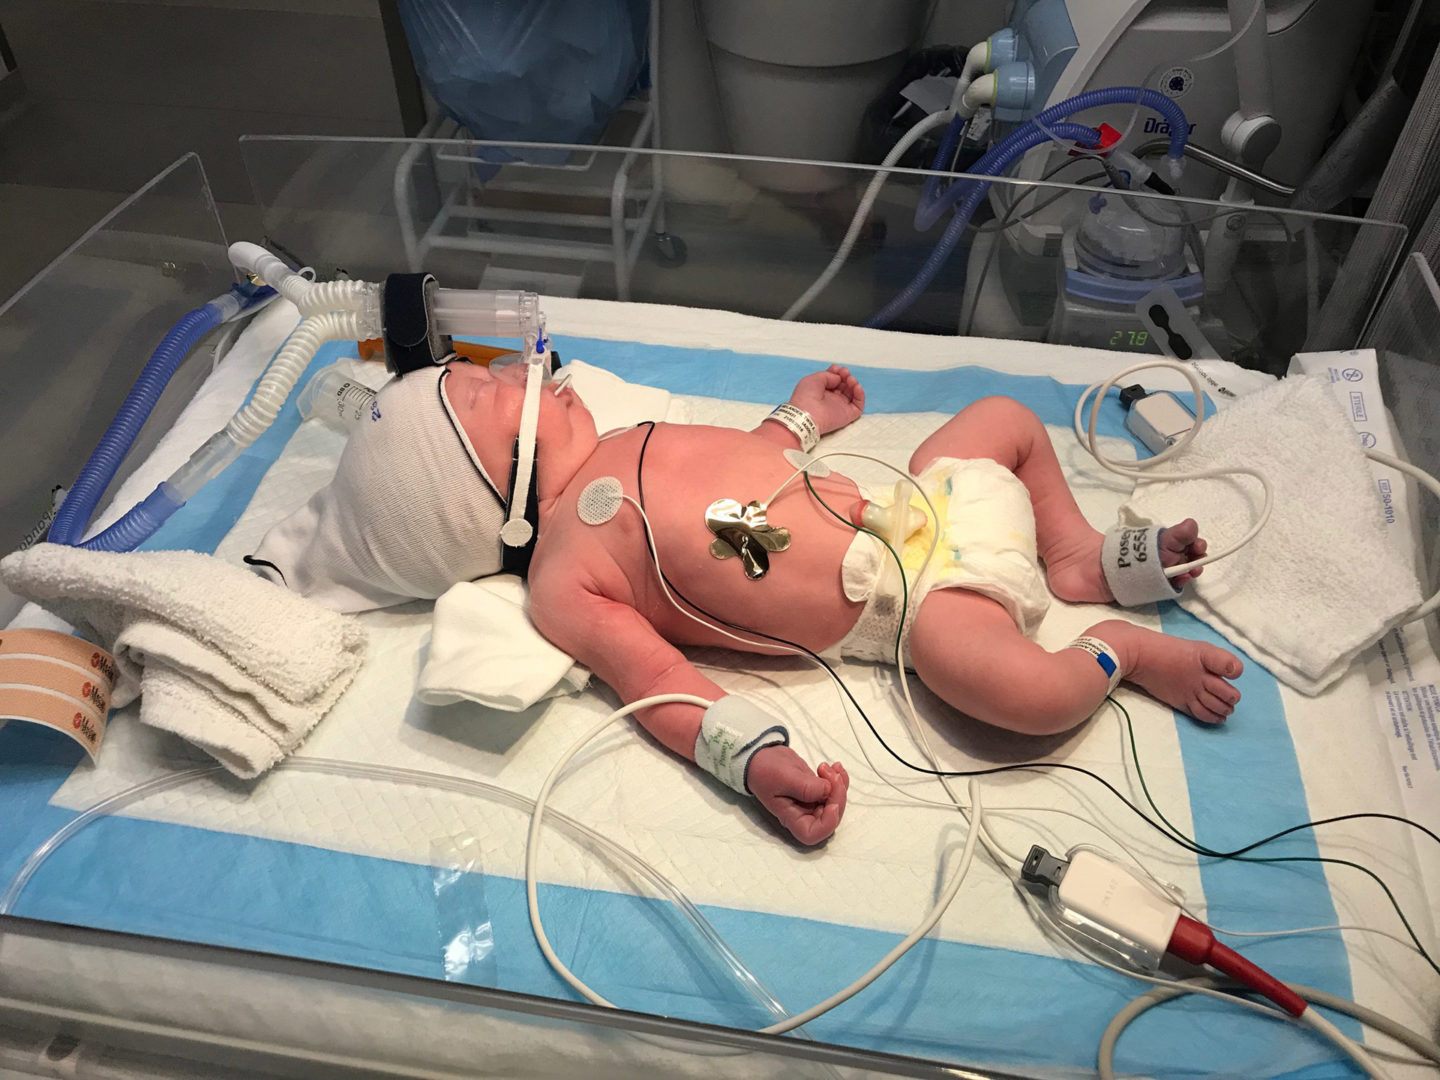 Baby A was a vaginal twin birth